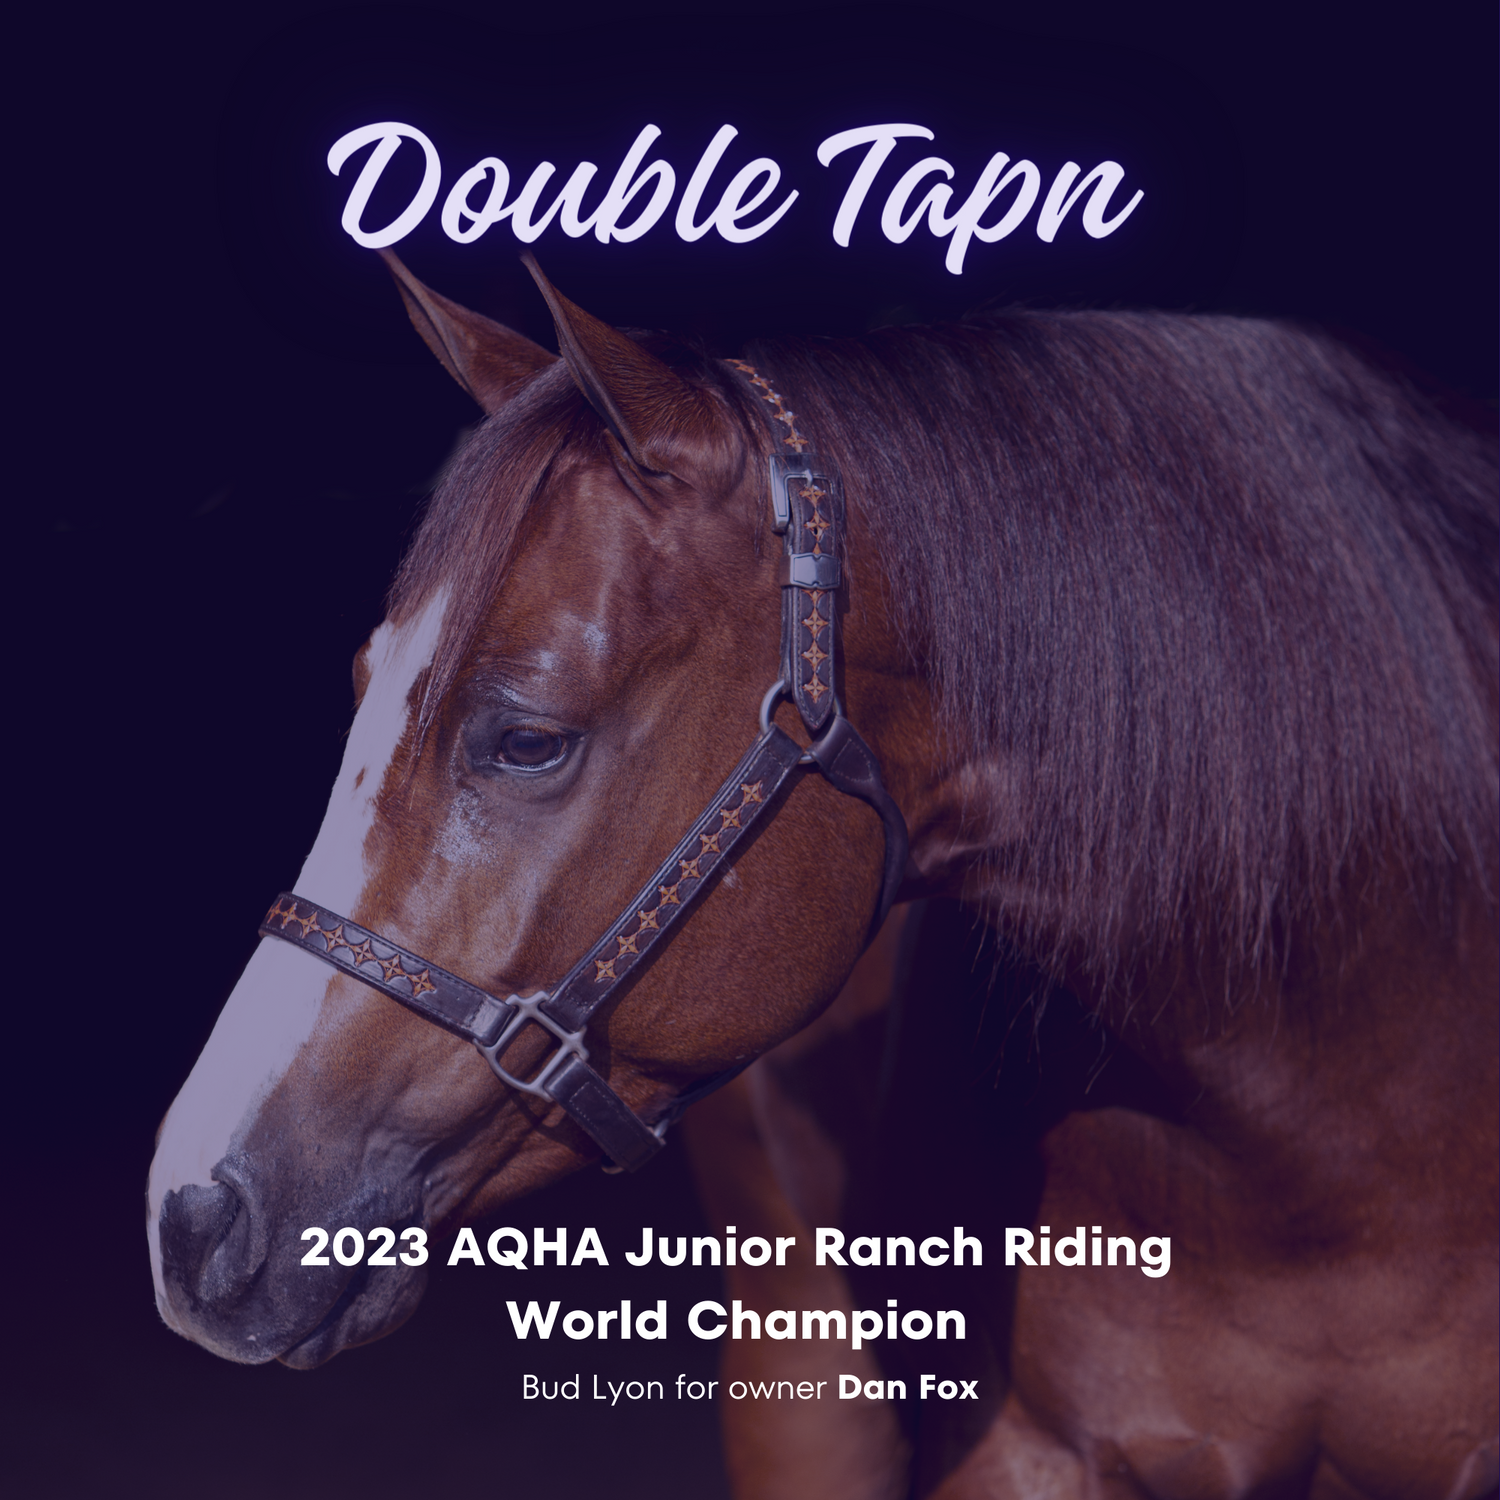 Double Tapn and Bud Lyon take the 2023 win in AQHA Junior Ranch Riding for owner Dan Fox.